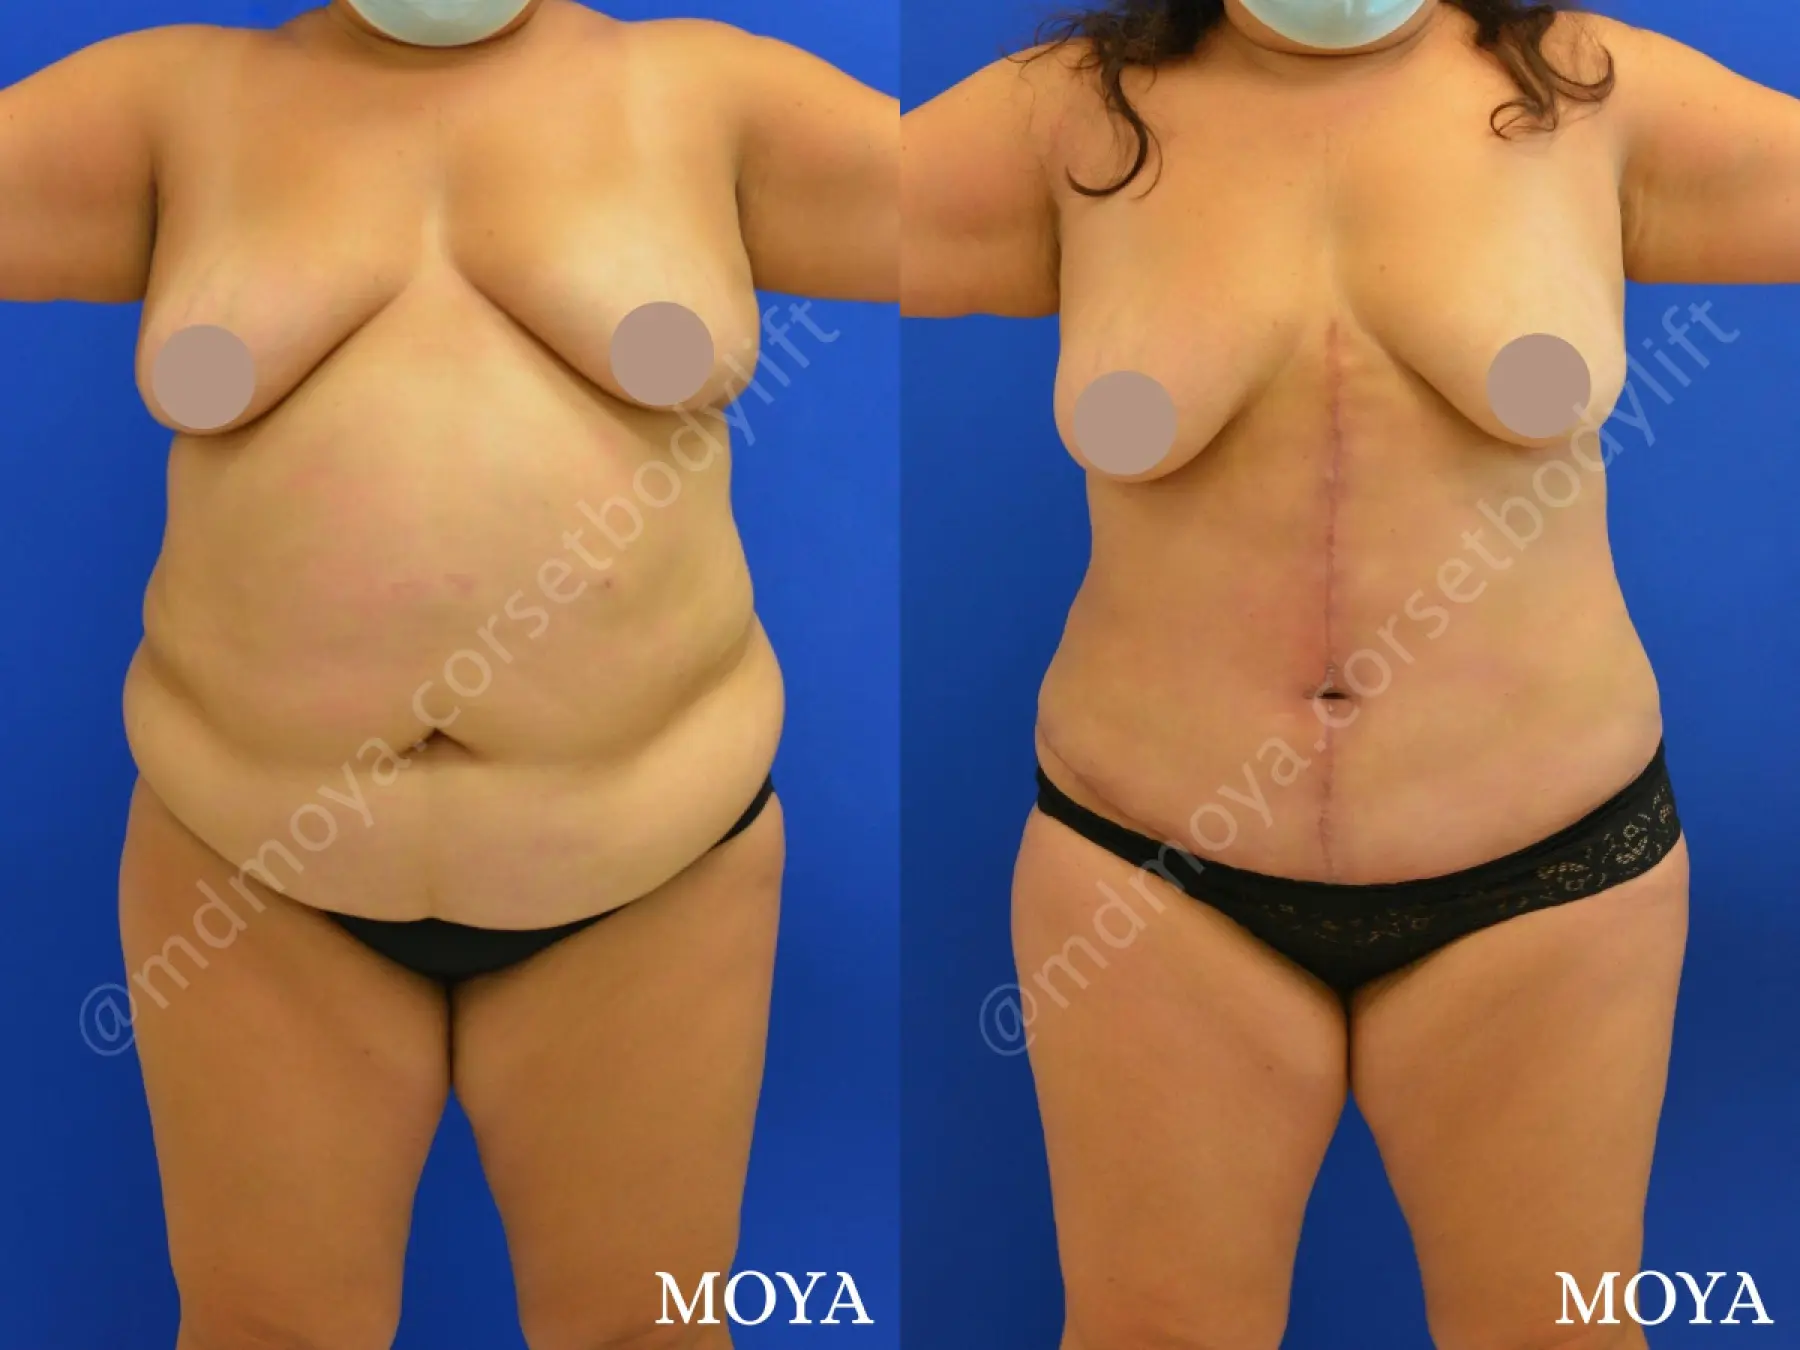 Fleur-de-lis Tummy Tuck (std):  BMI 32 - Before and After 1